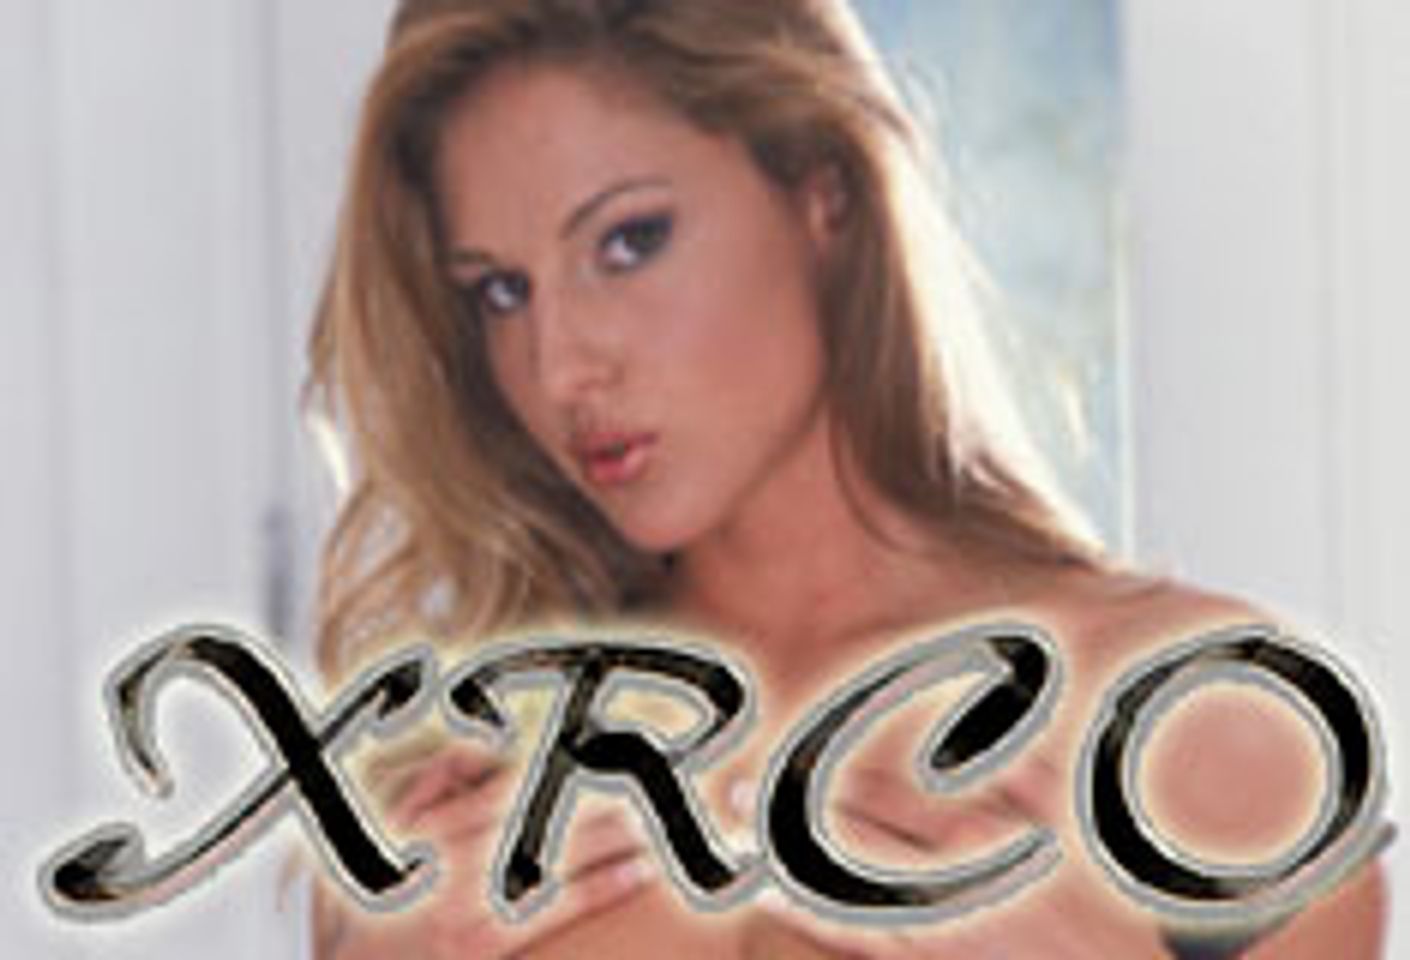 Showtime to Shoot Butts at XRCO Show